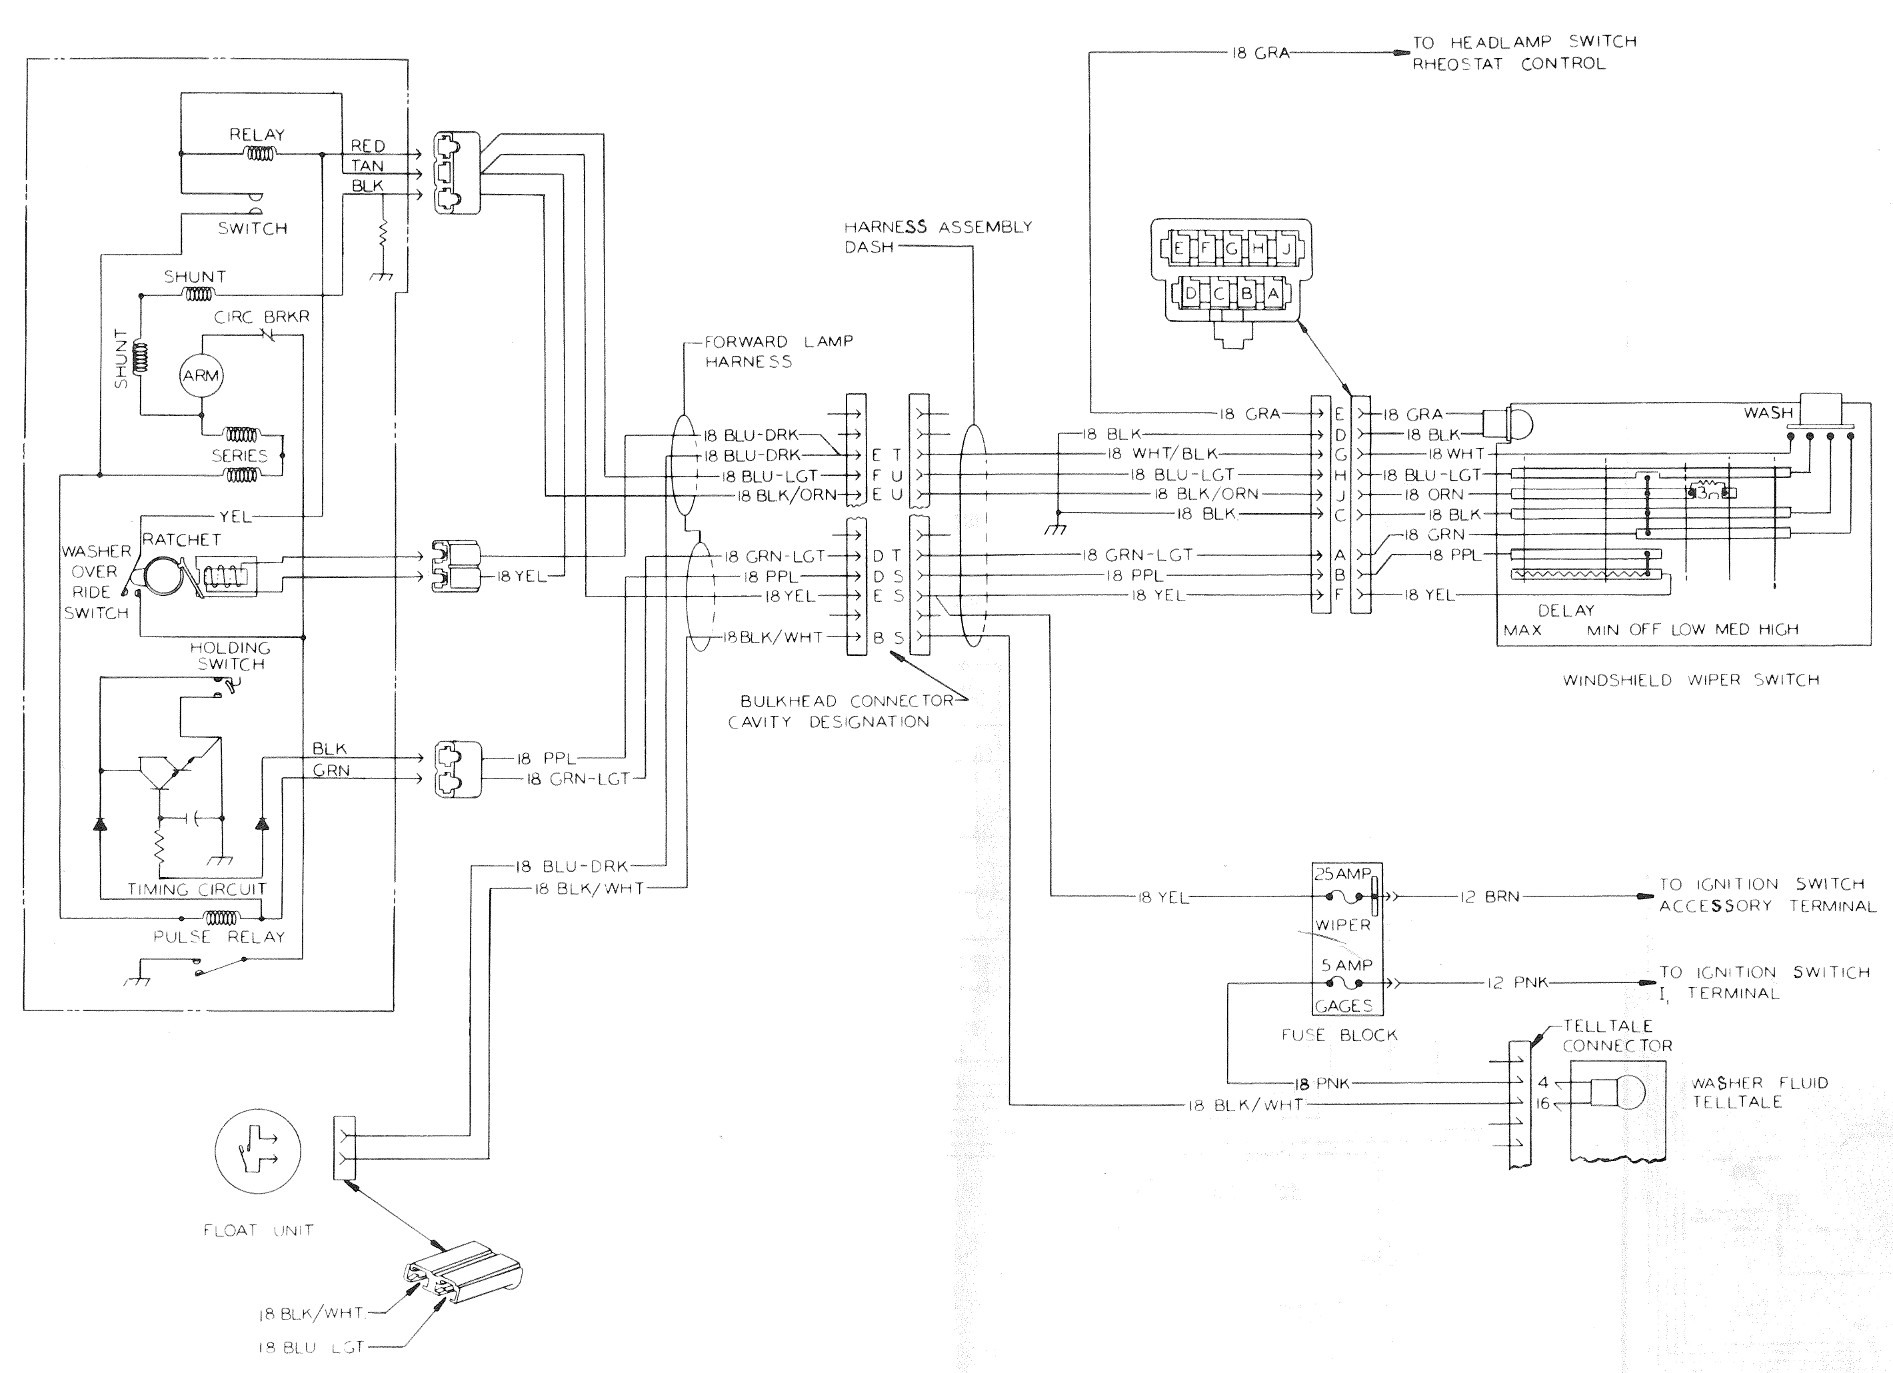 Windshield Wiper Wiring Circuit (Controlled Cycle). 1977-78